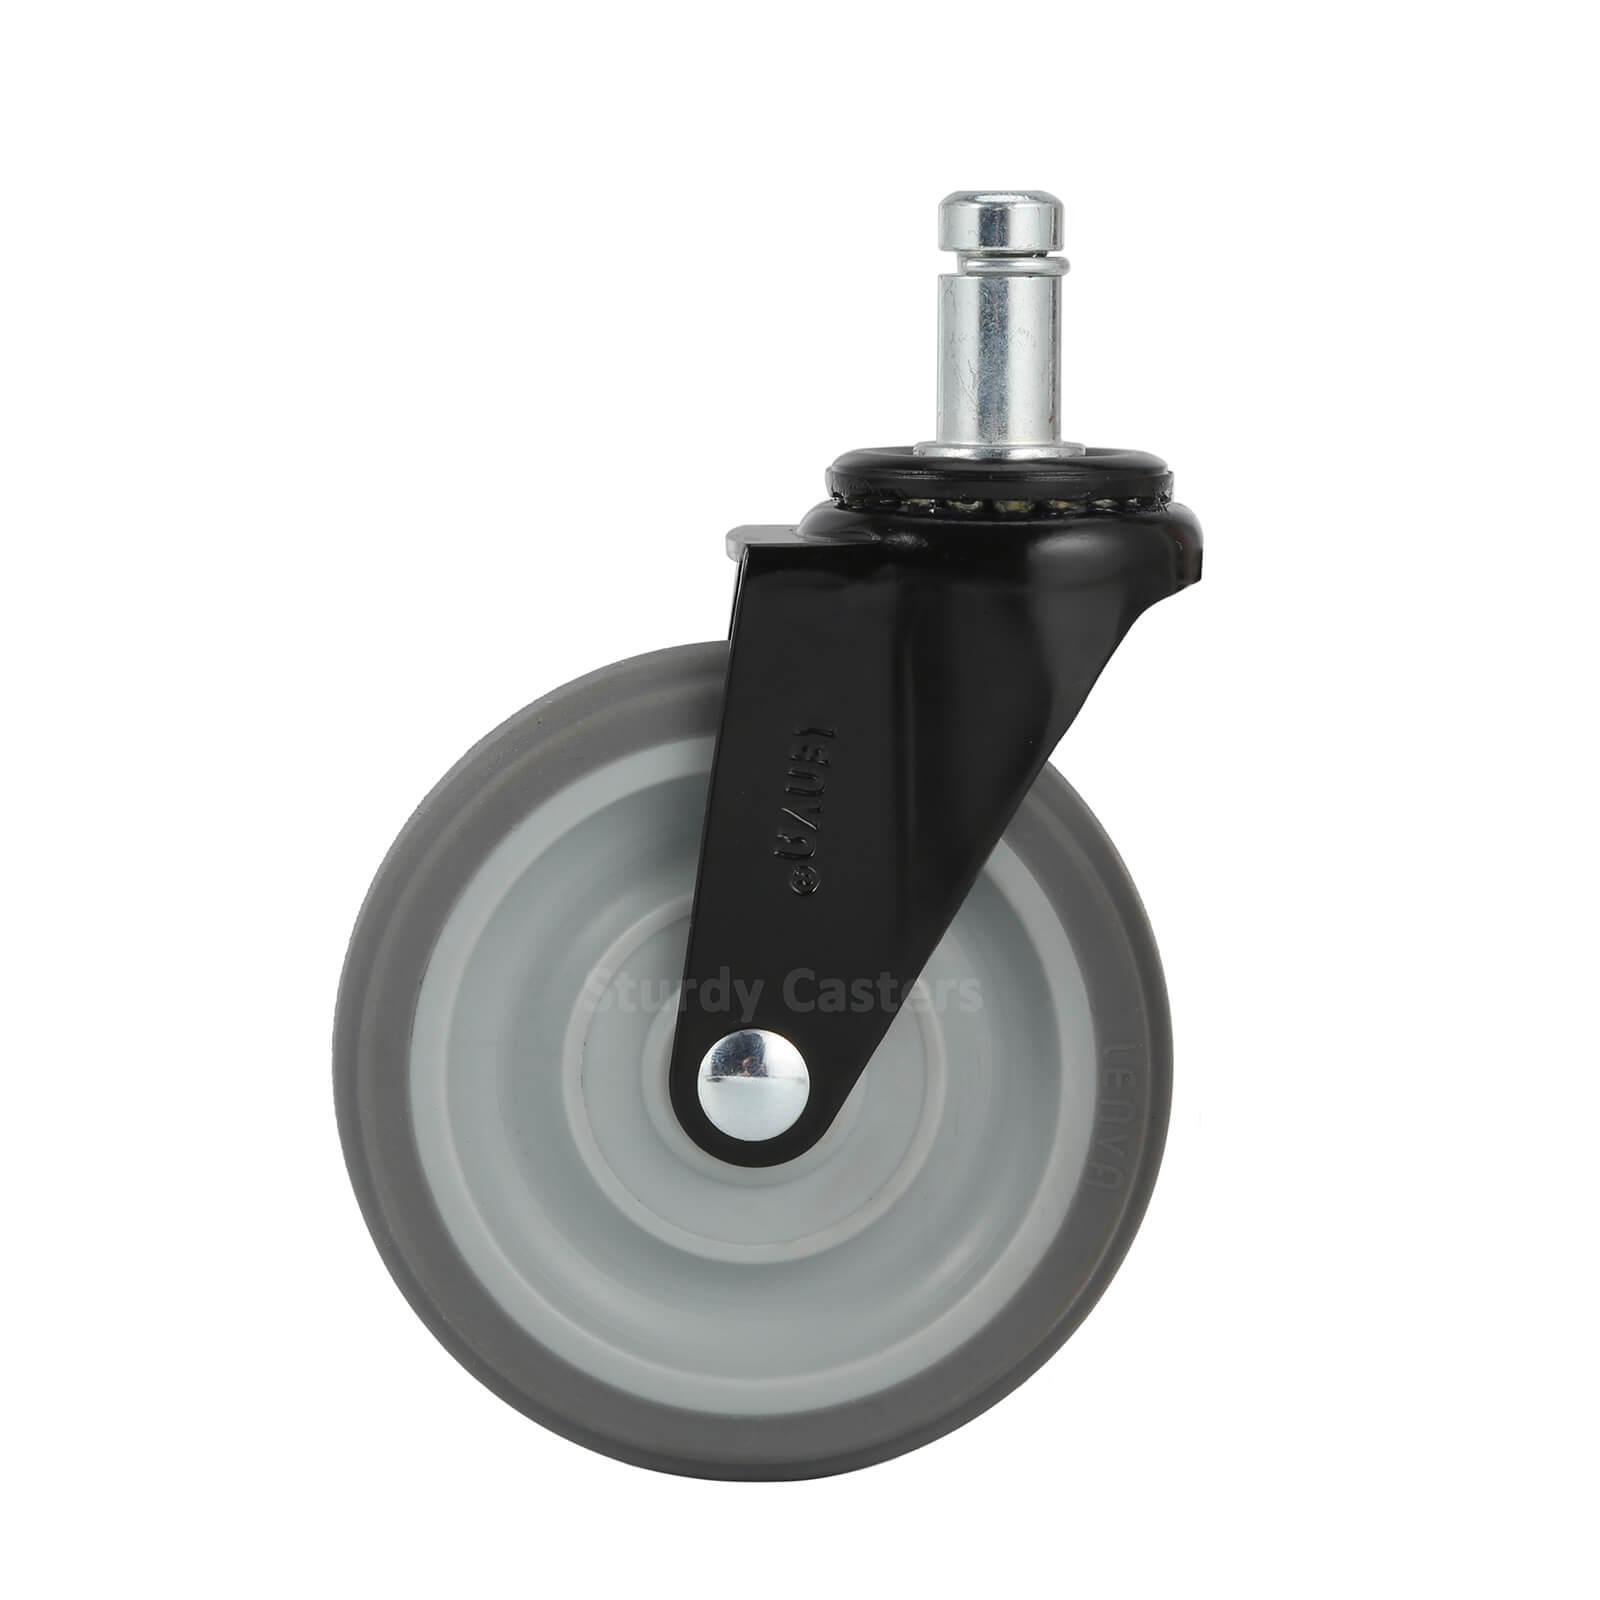 LENVA 3 inch Replacement Caster Wheel for Mop Buckets